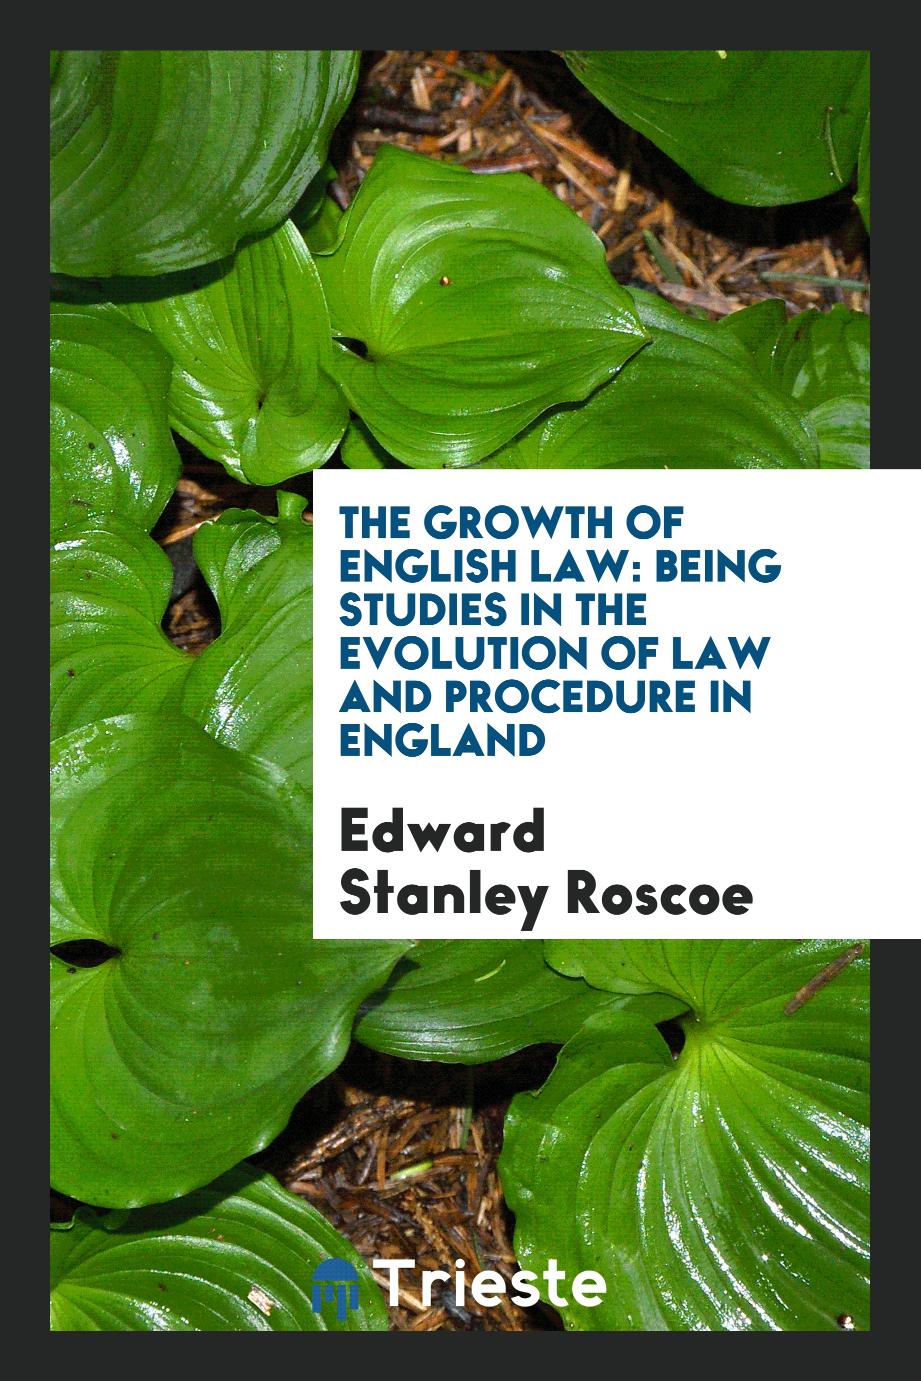 The growth of English law: being studies in the evolution of law and procedure in England